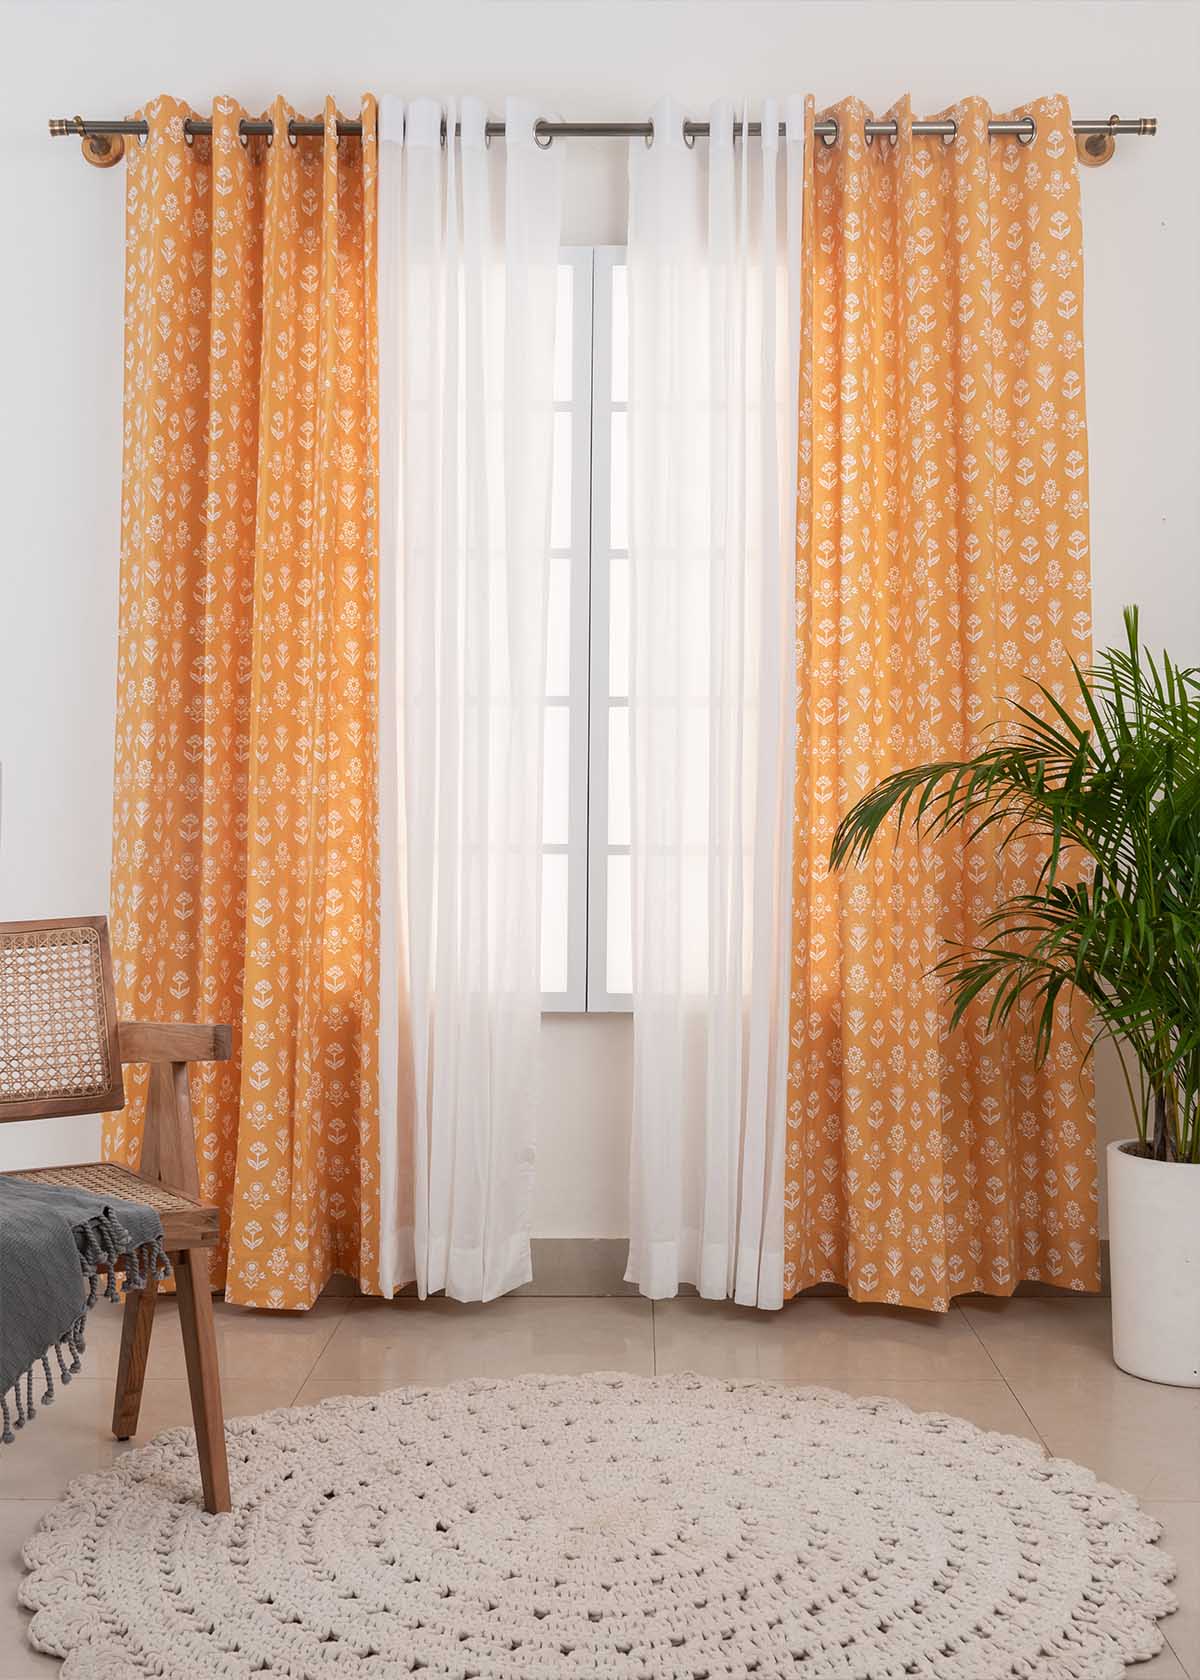 Dahlia Mustard, Solid Warm White Solid Sheer Set Of 2 Combo Cotton Curtain - Mustard, White